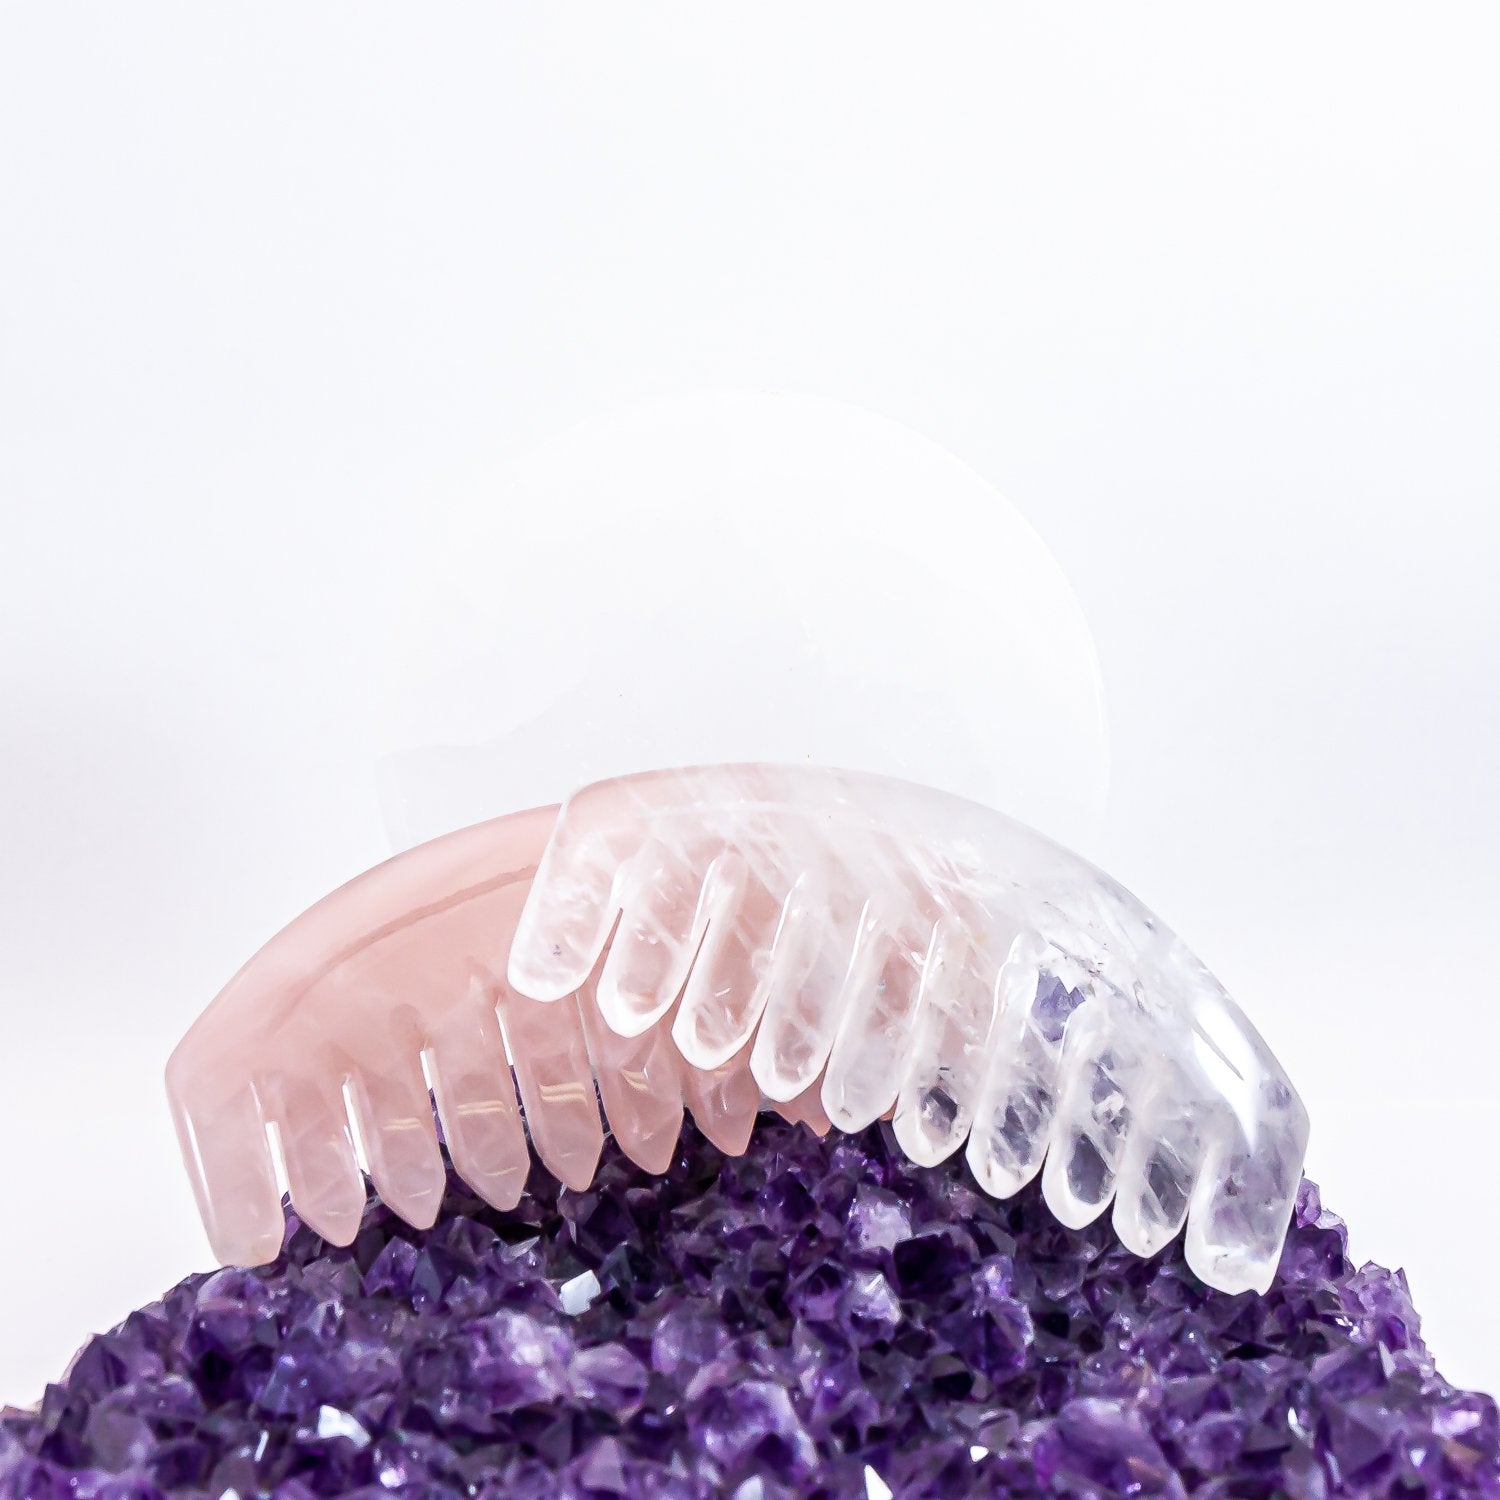 Crystal combs. Rose quartz and clear quartz sitting on amethyst cluster.